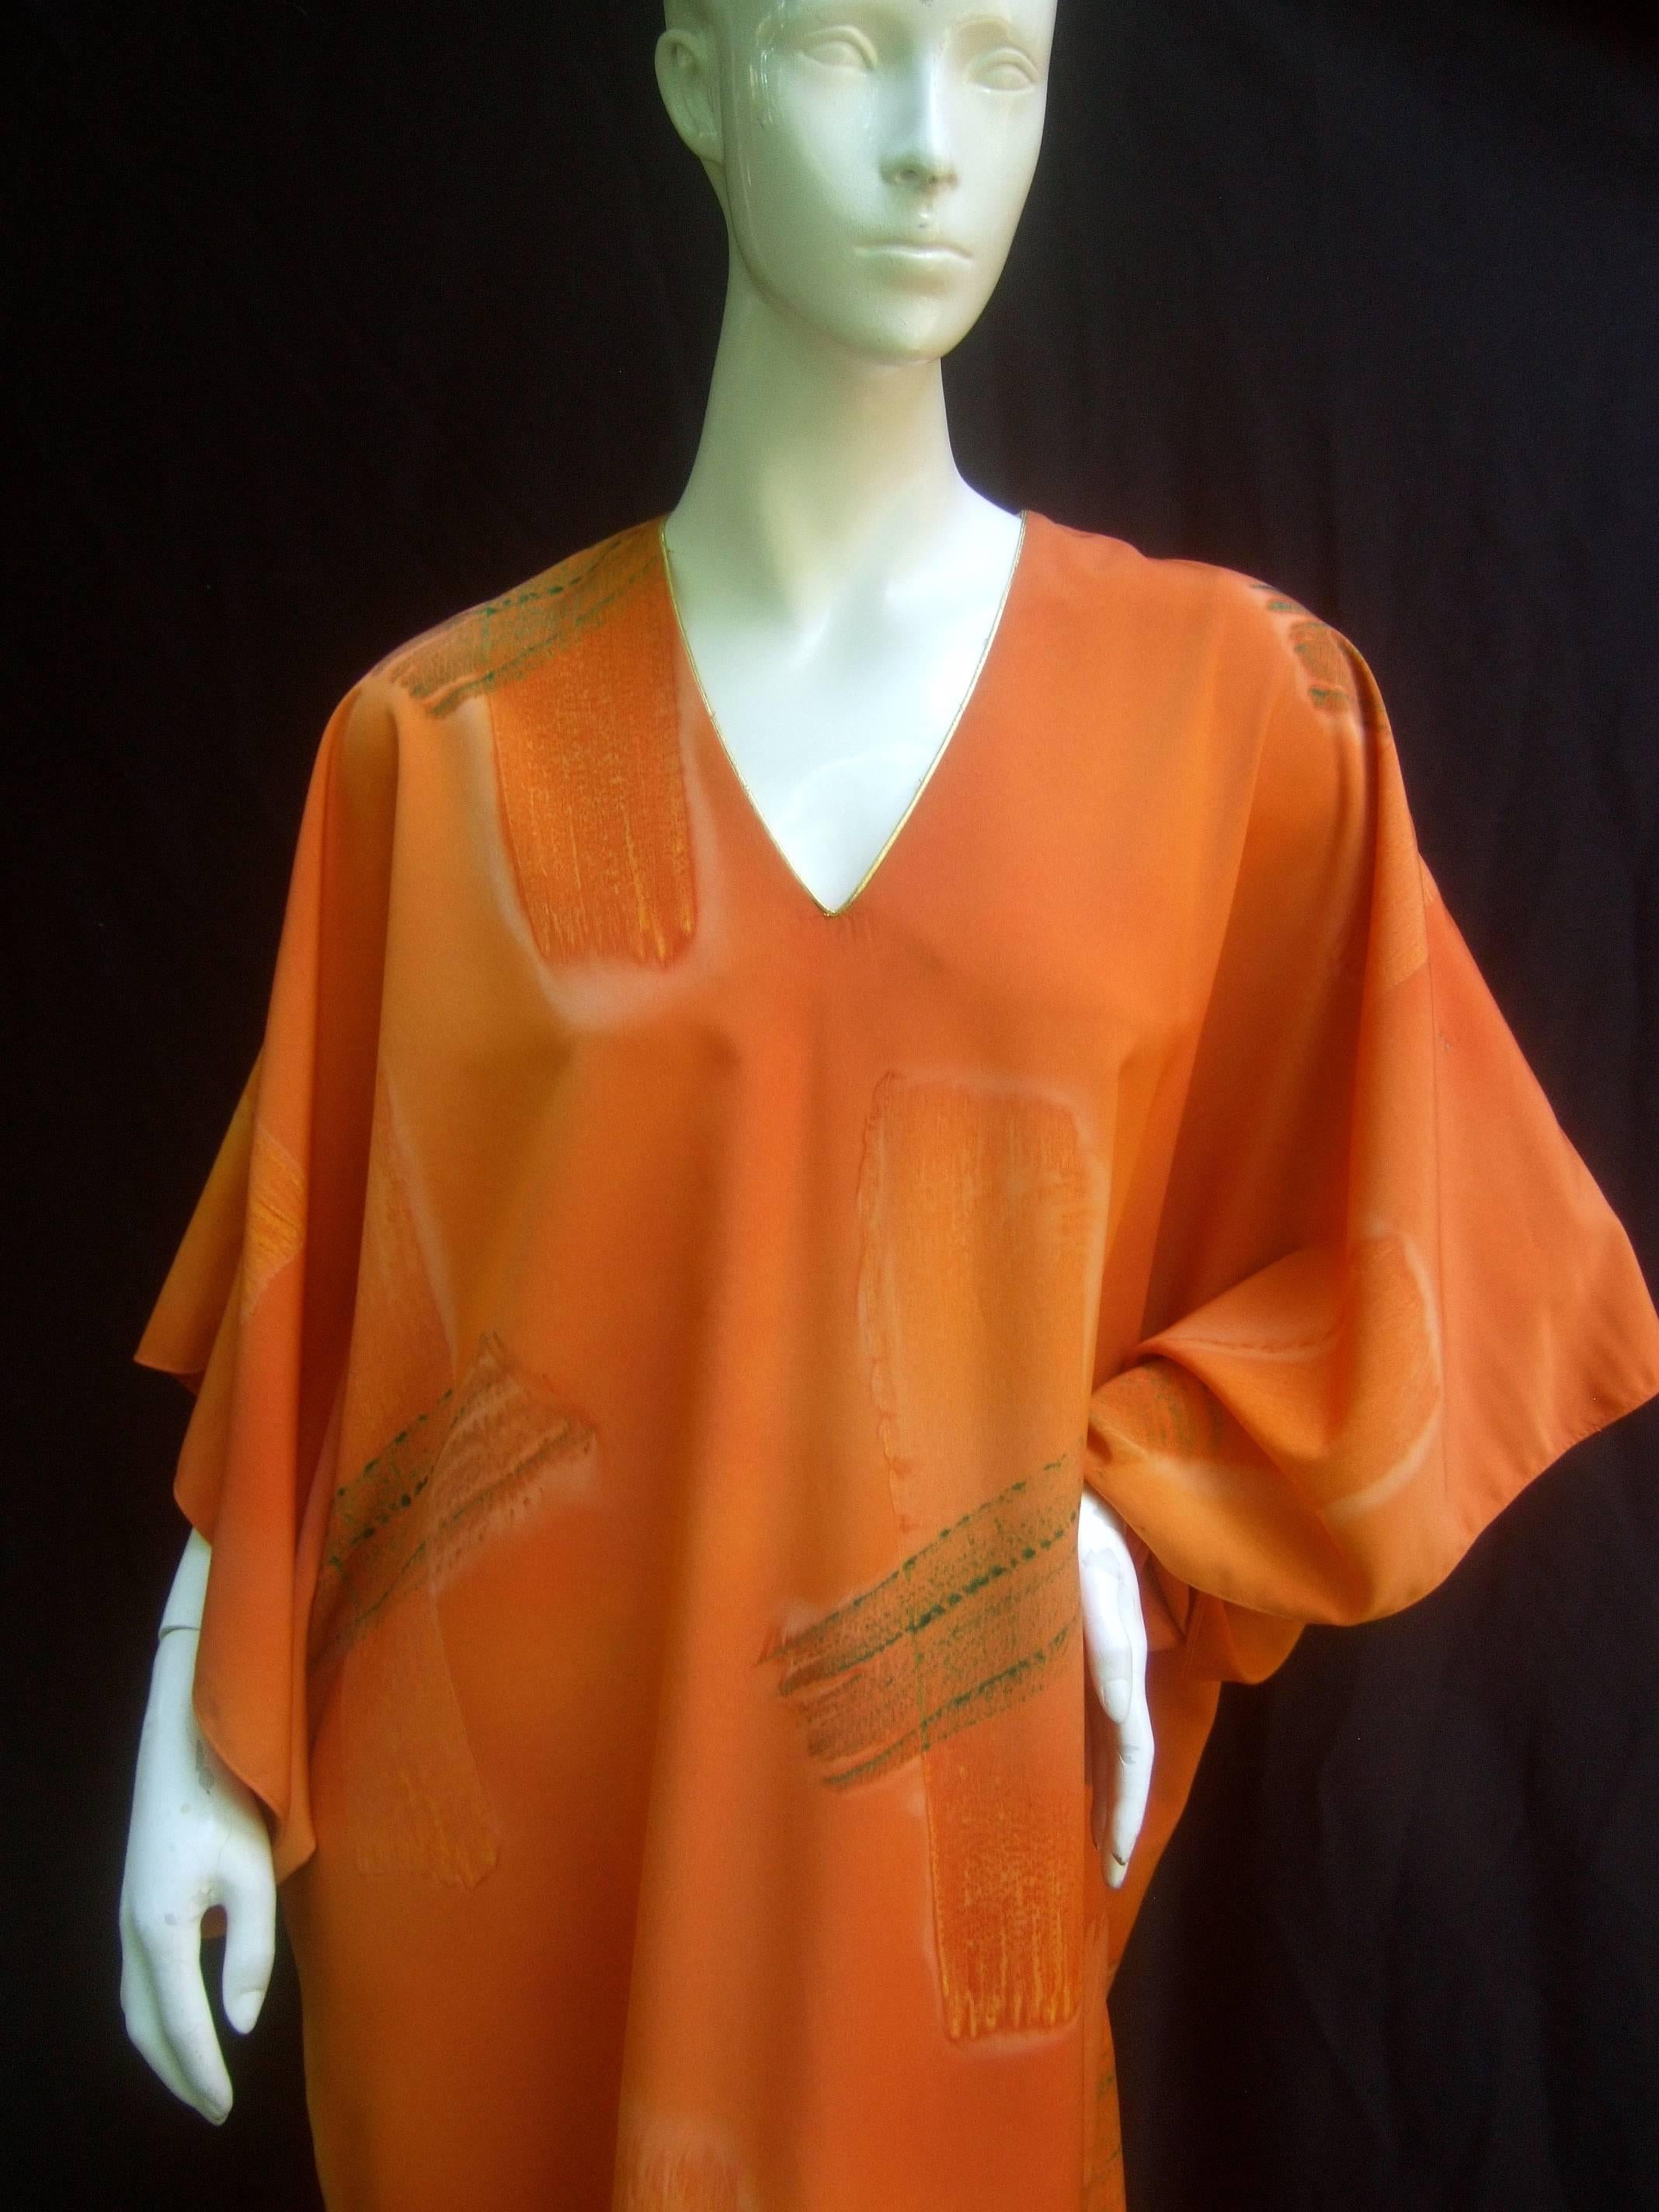 Orange Reserved Sale Pending Chic Tangerine Caftan Lounge Gown for Neiman Marcus c 1990